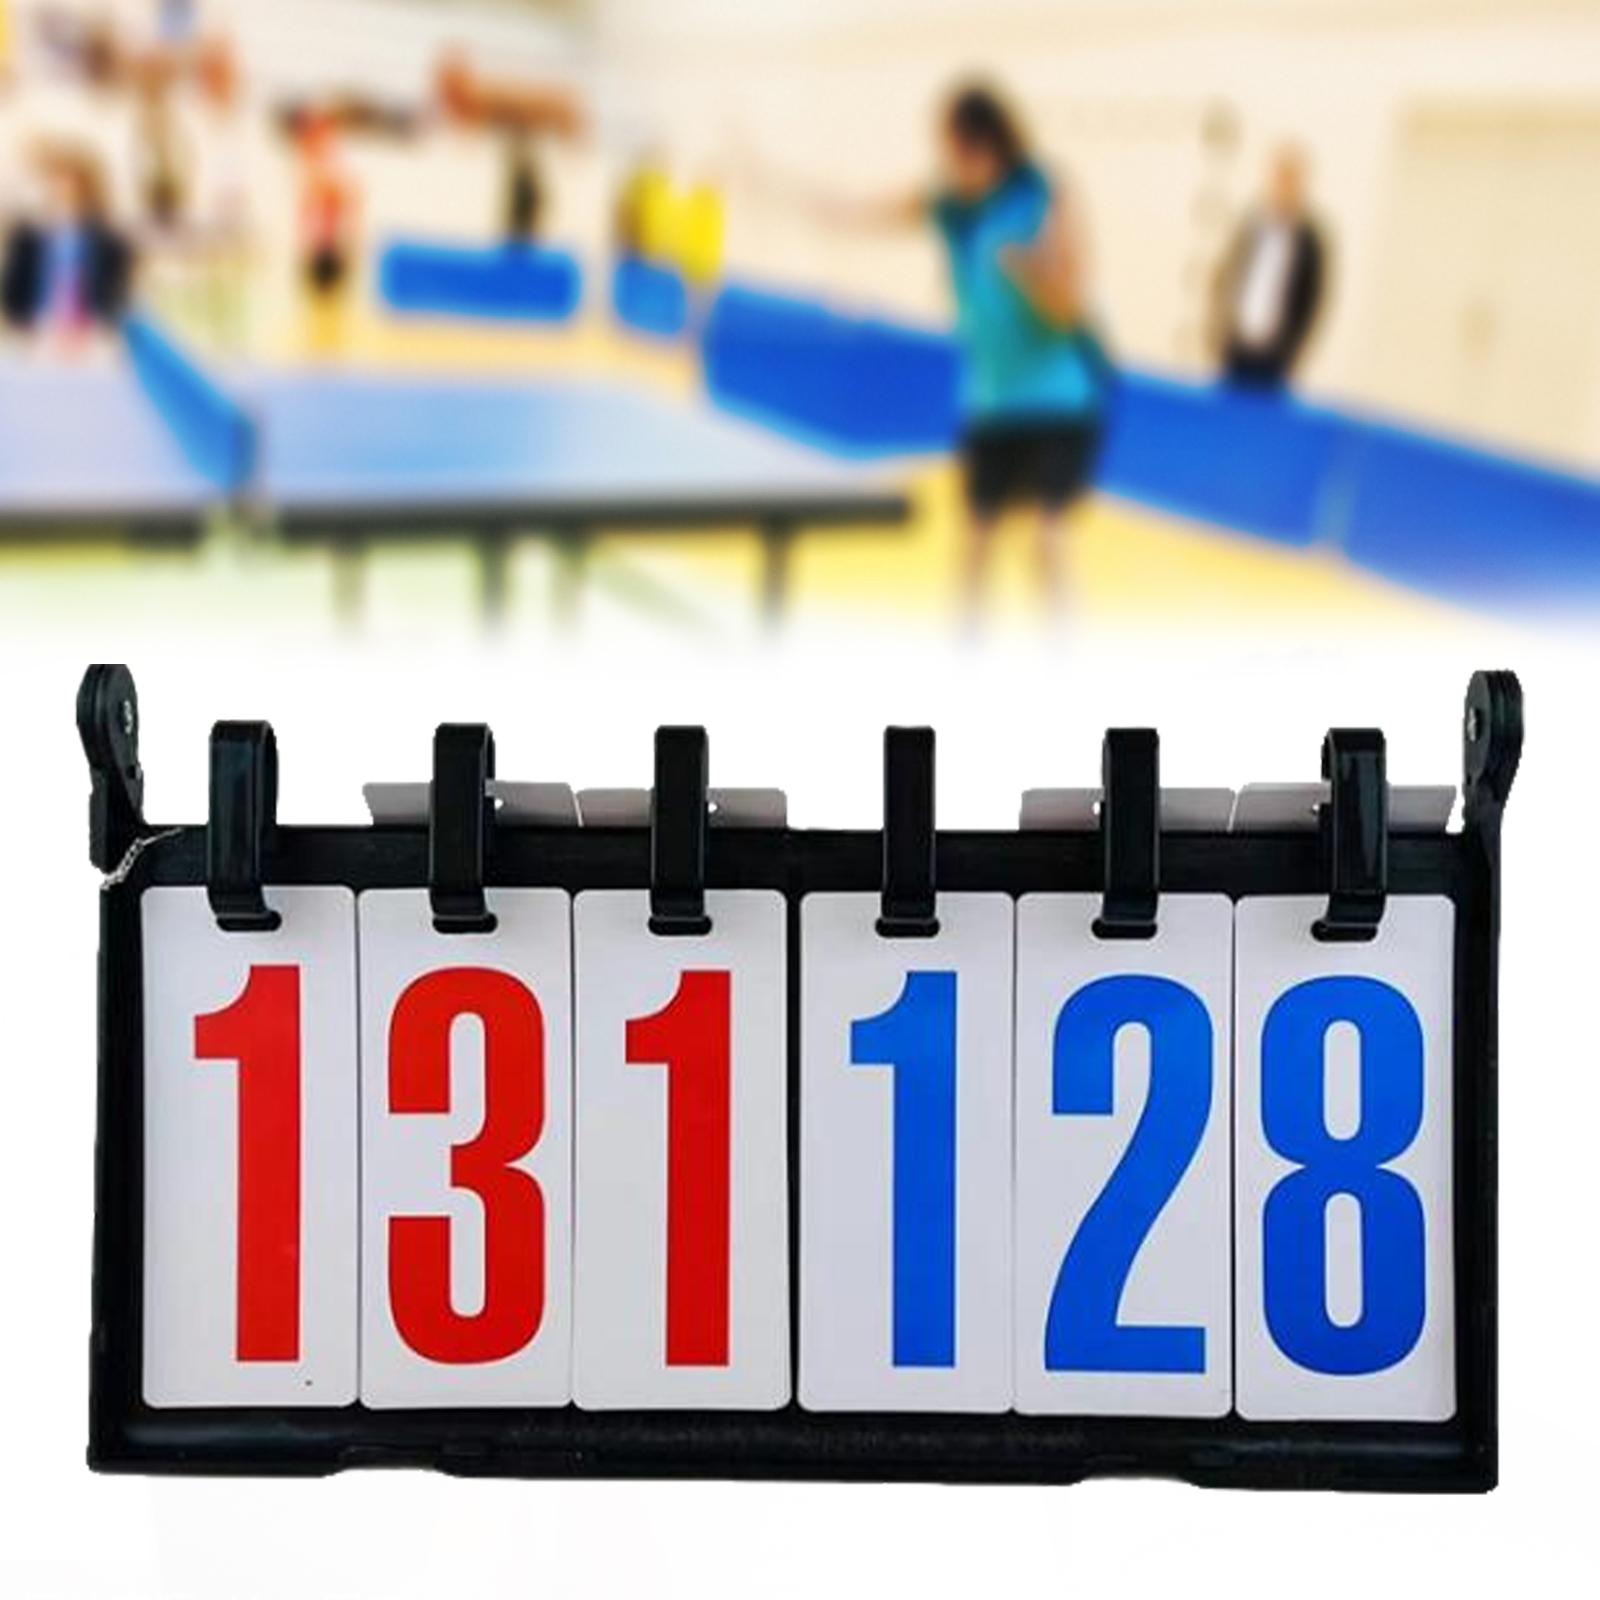 Tabletop Scoreboard Competition Score Keeper for Outdoor Basketball Baseball